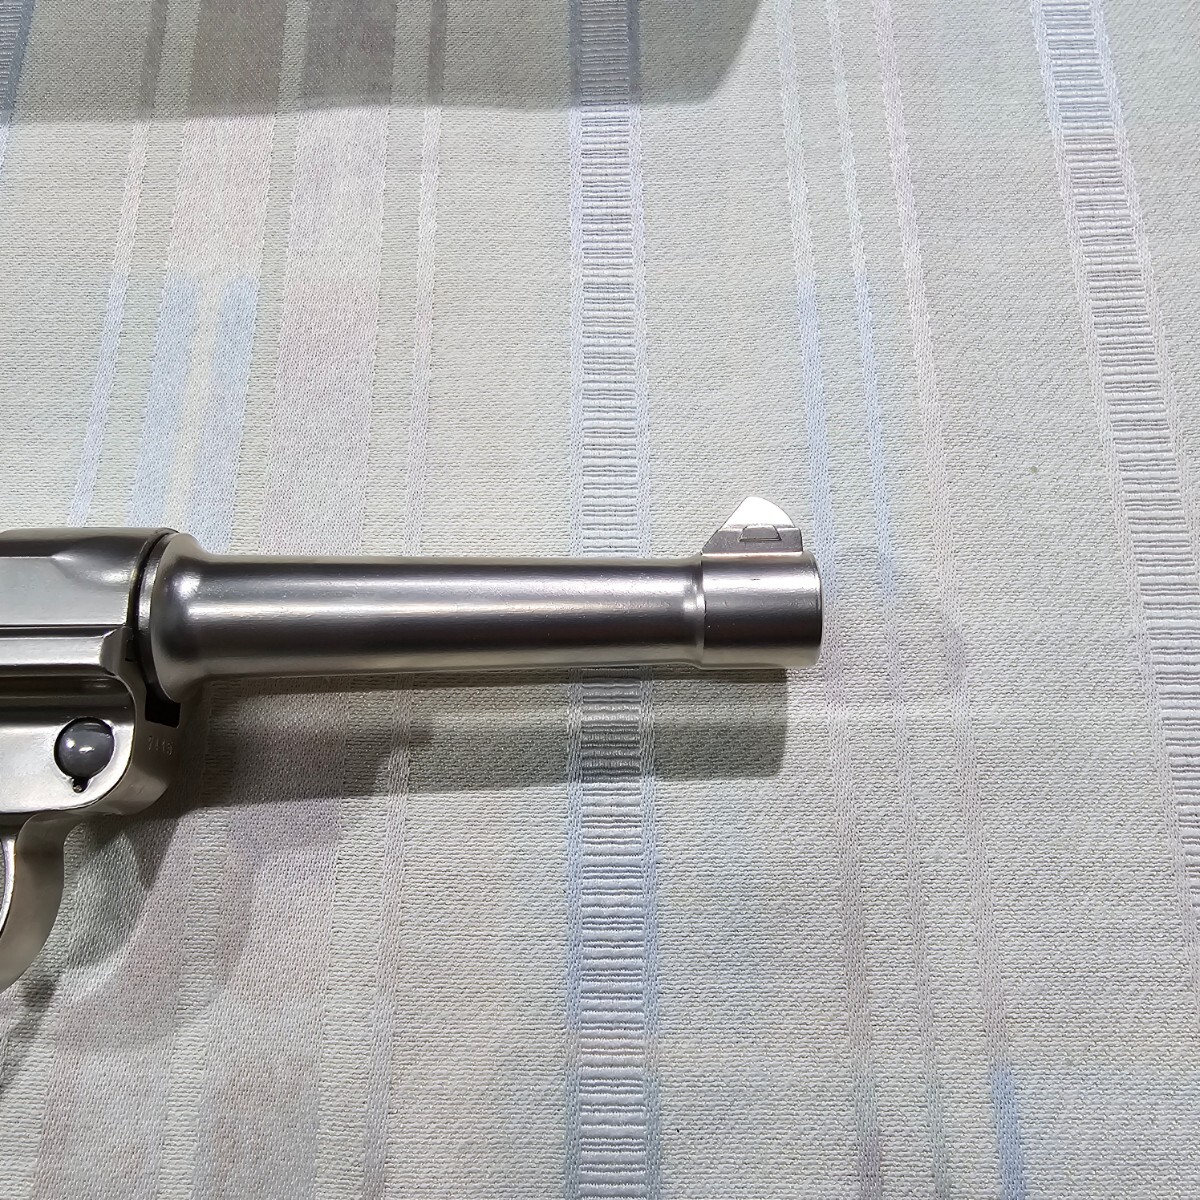 1 jpy ~tanaka Works LUGER P08 Luger P08 gas gun that ③